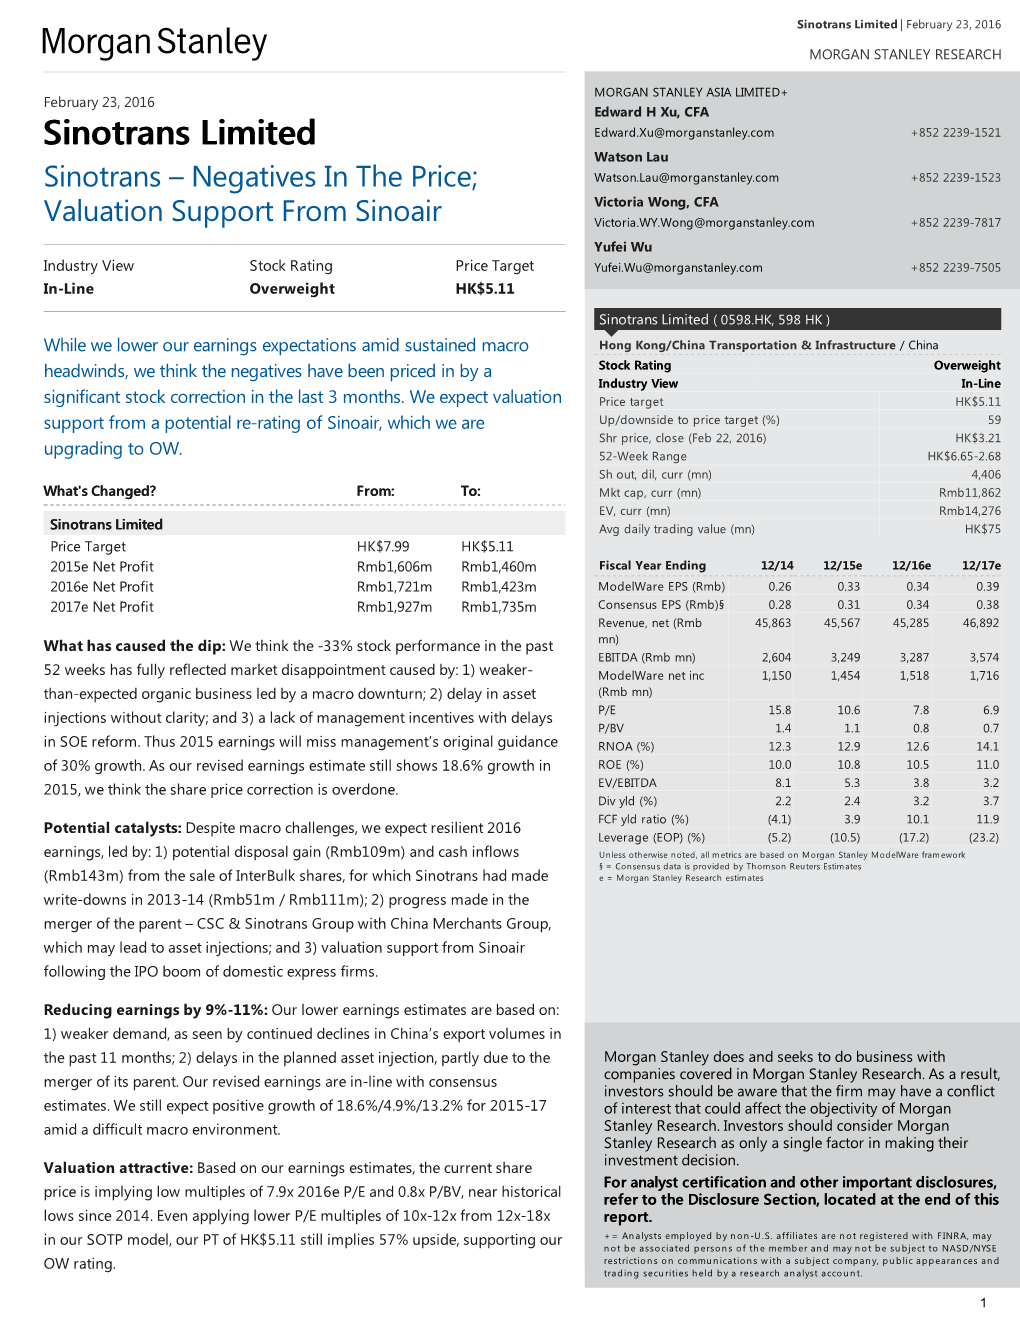 Sinotrans Limited: Sinotrans – Negatives in the Price; Valuation